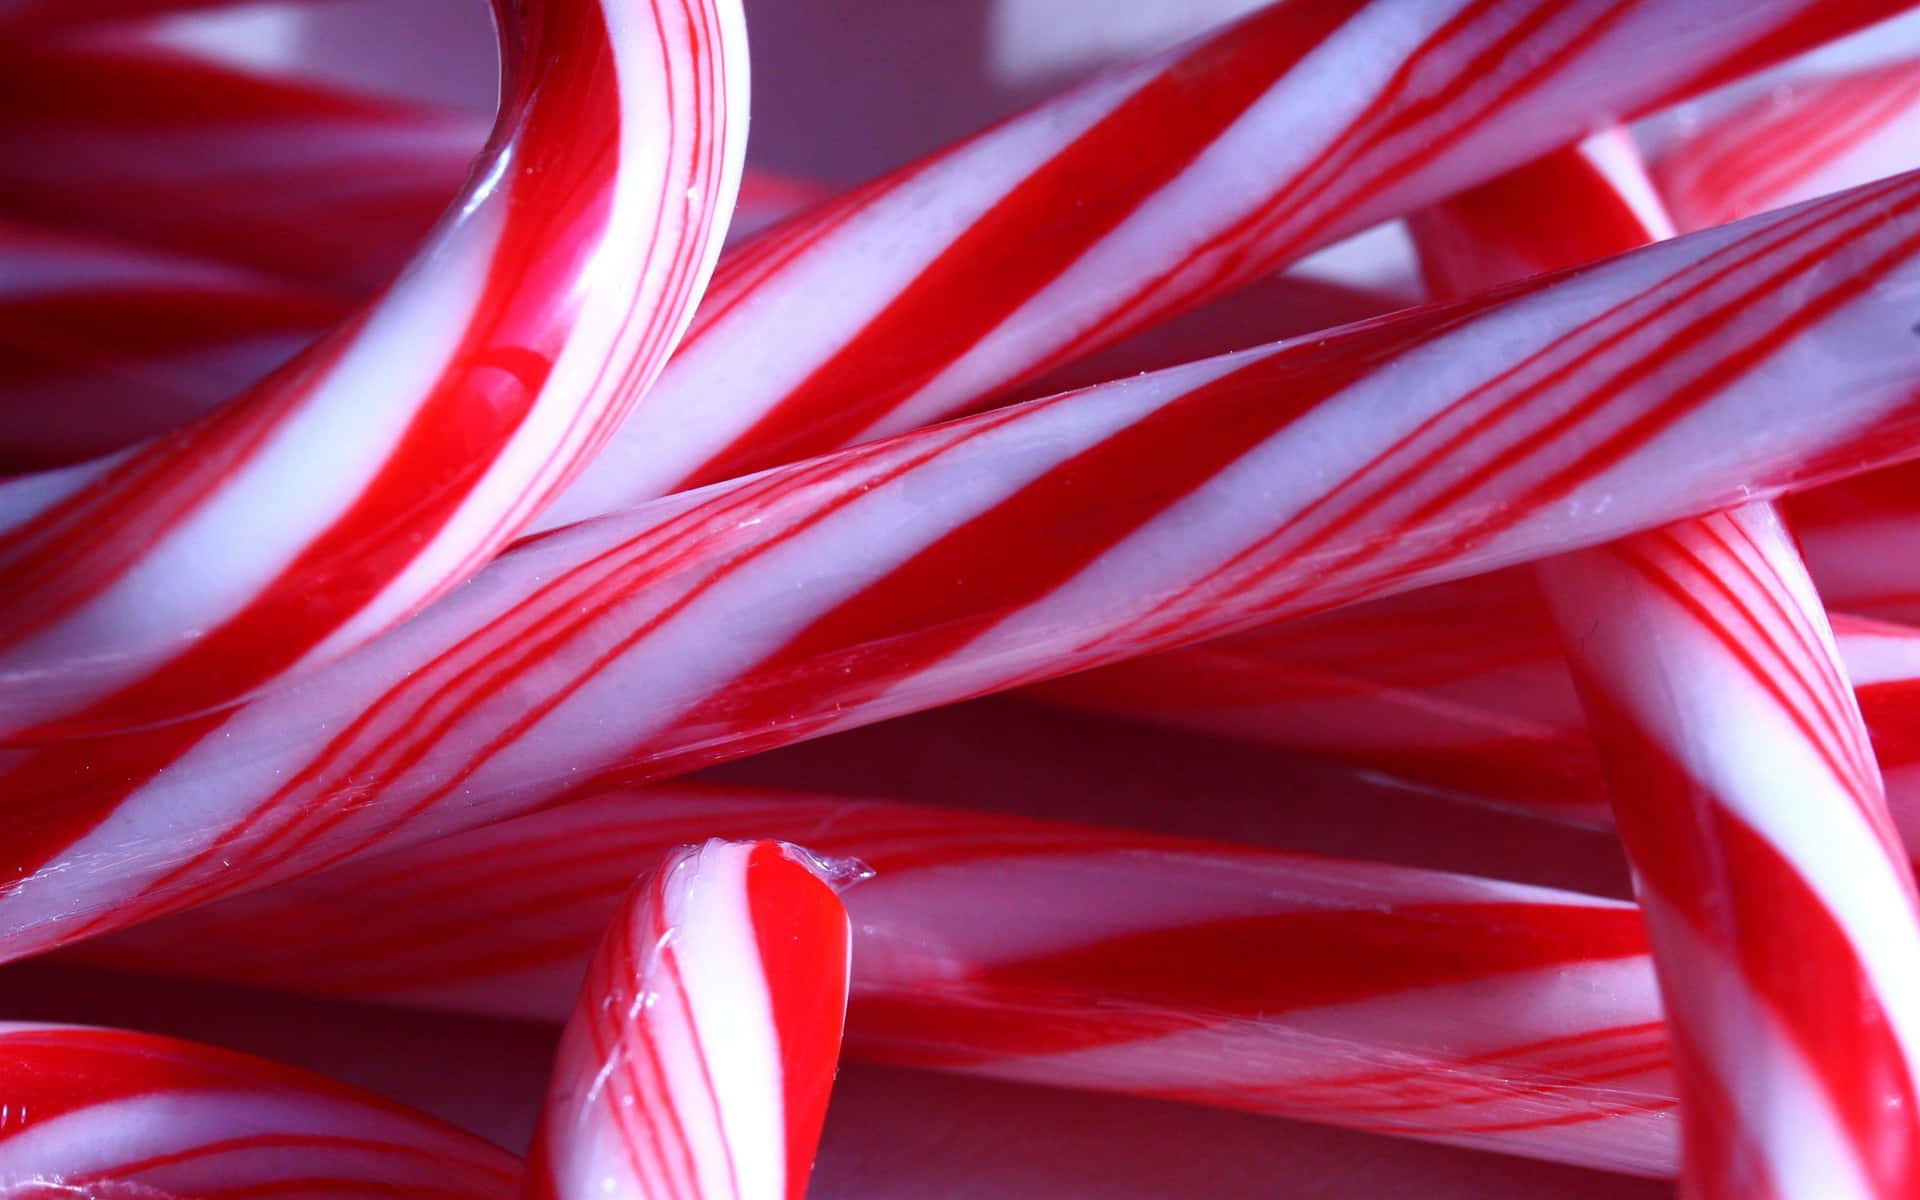 Enjoy the sweet, delightful taste of Christmas with a Candy Cane